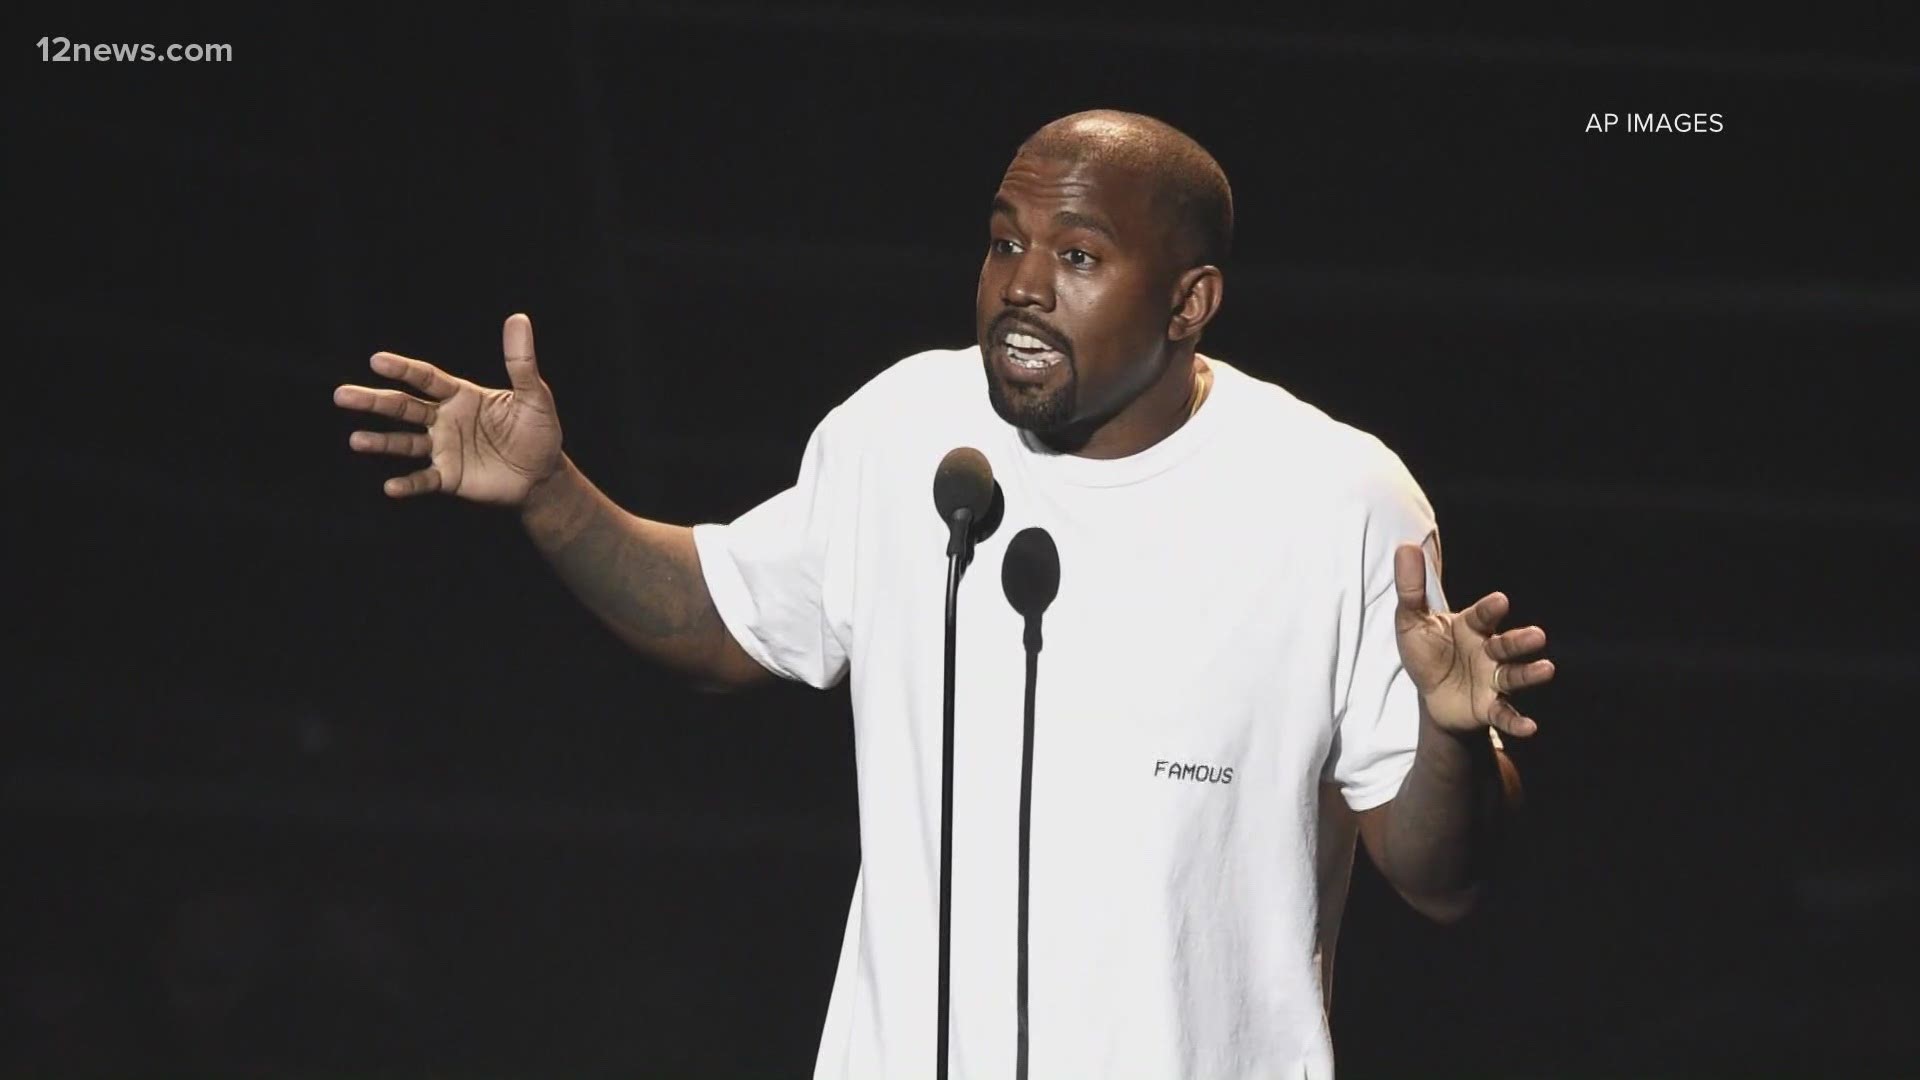 A Maricopa County judge ruled in favor of plaintiffs suing to keep Kanye West off the ballot. West is a registered Republican and is trying to run as an Independent.